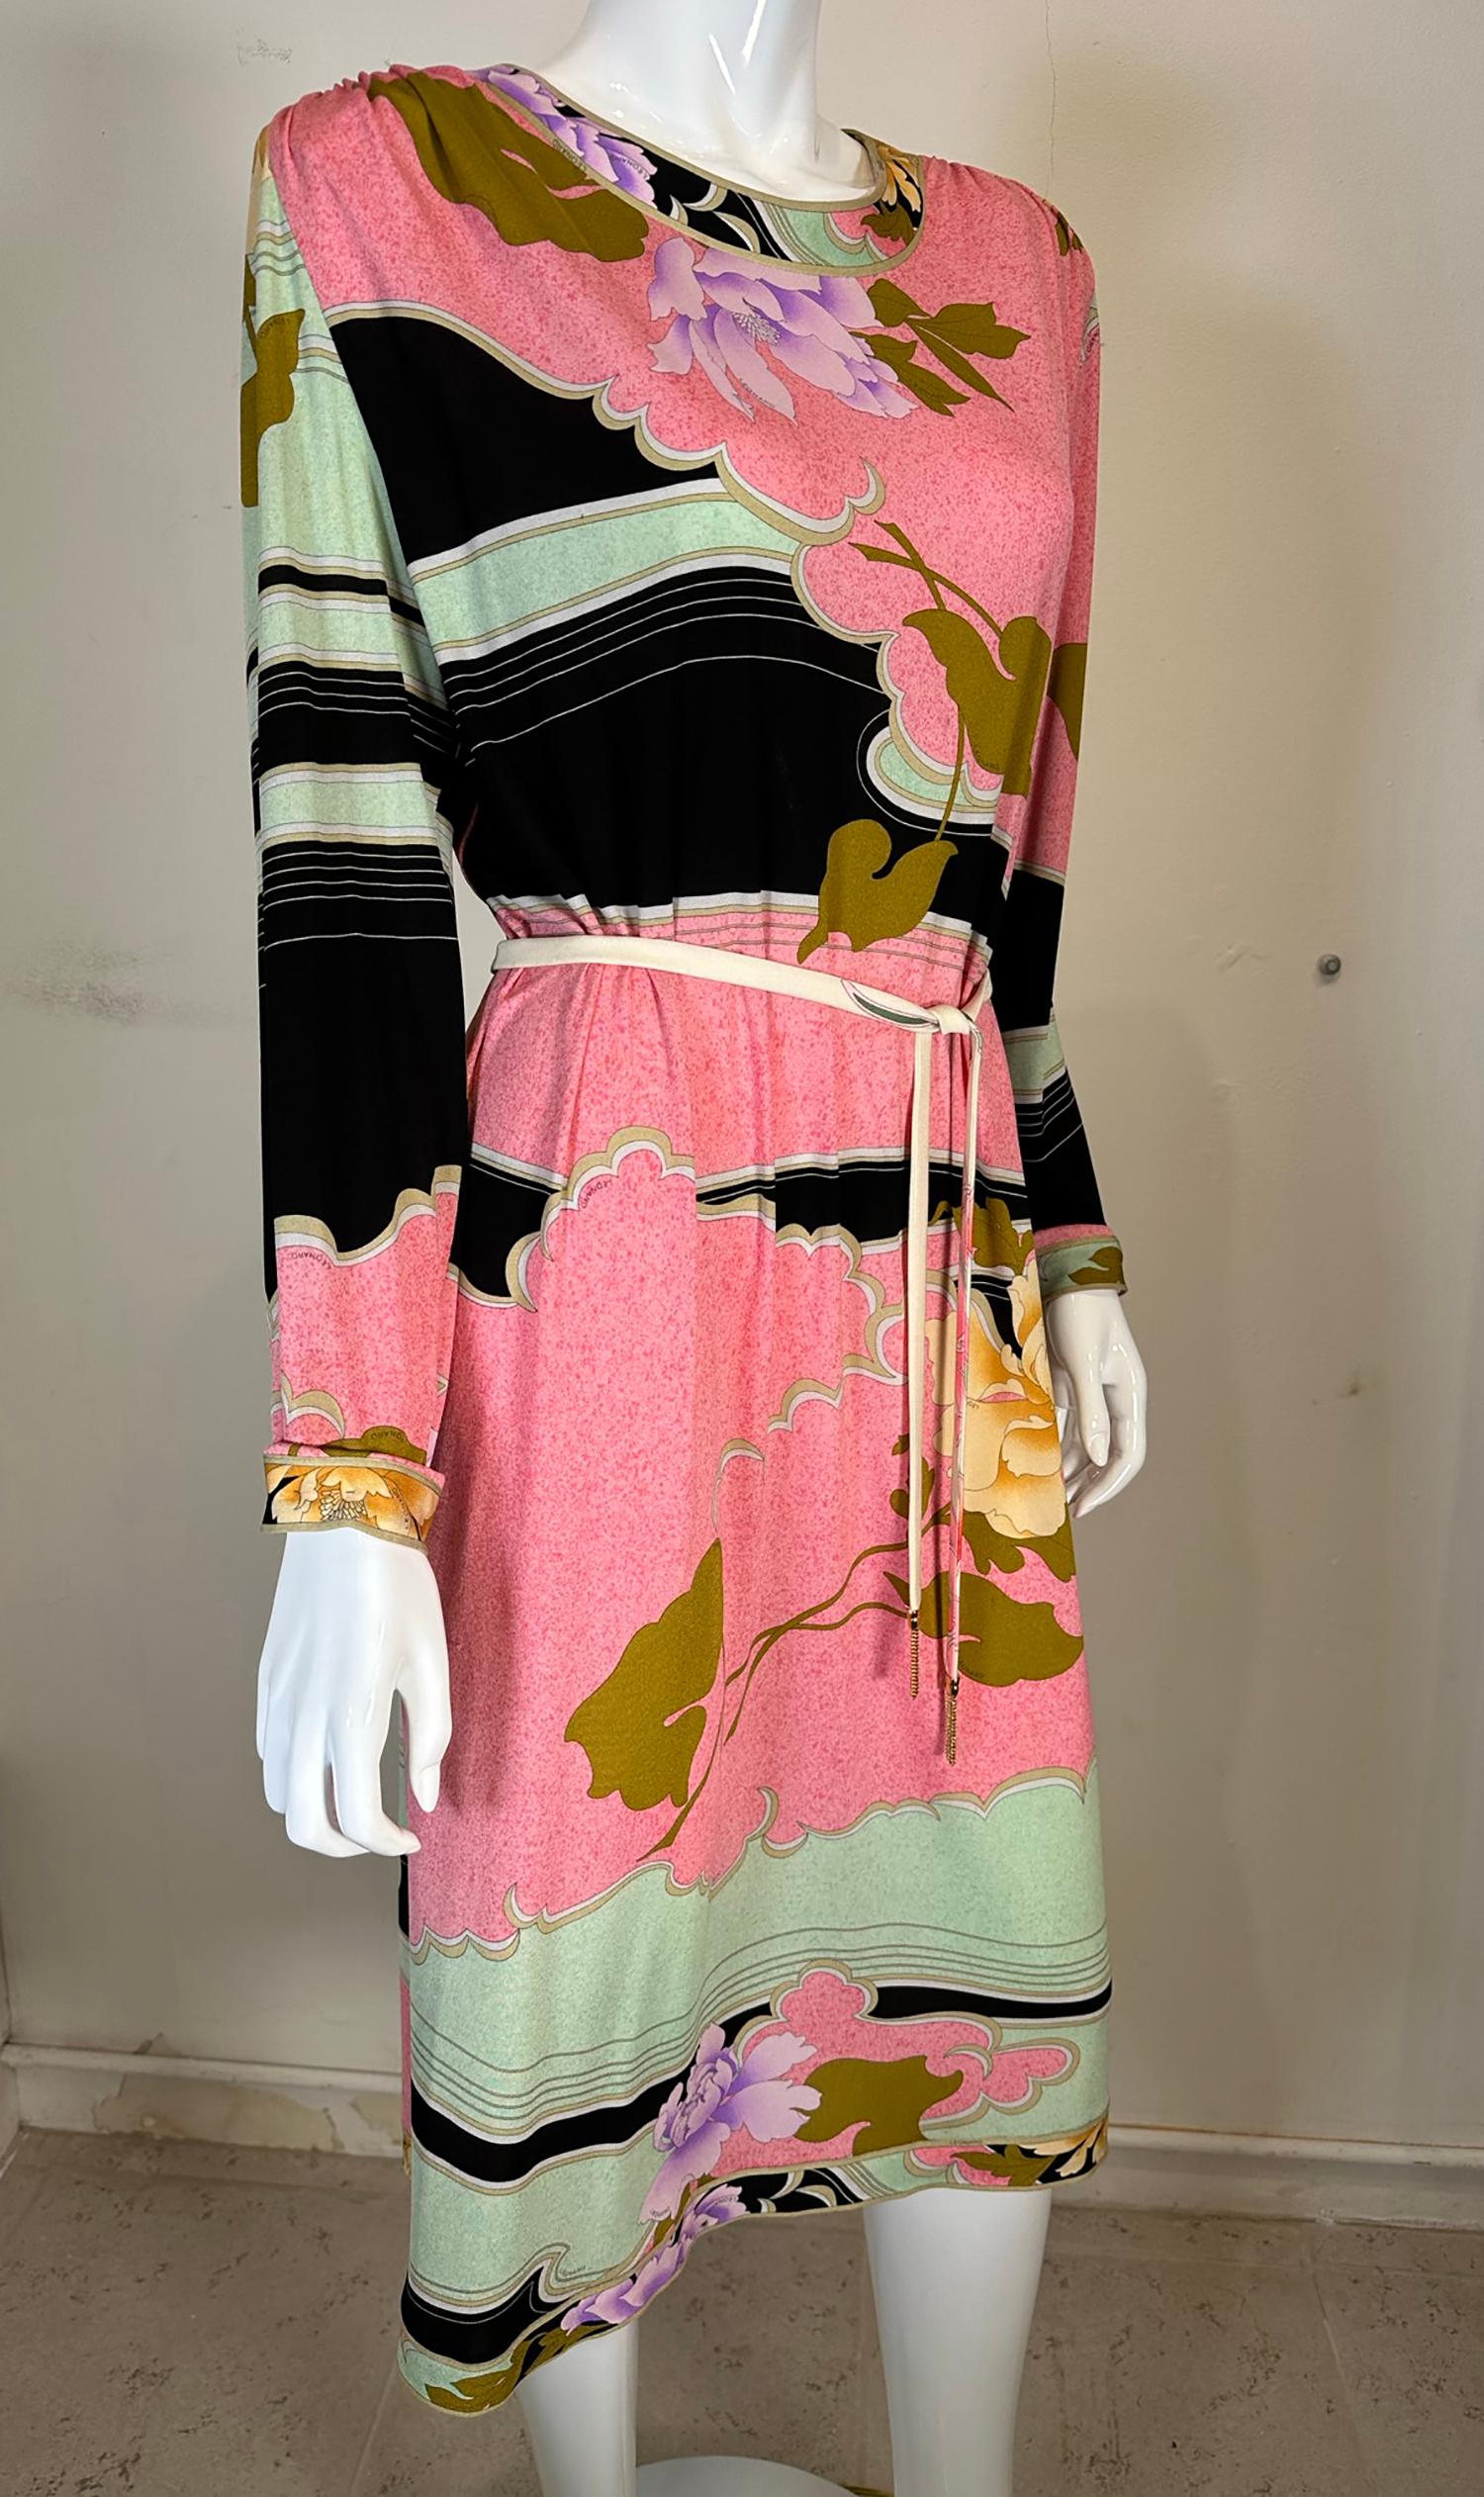 Leonard Paris silk jersey floral print long sleeve shift dress with belt marked size 48.
Pull on dress, with gold tipped self belt, long sleeves. 
In excellent wearable condition. All our clothing is dry cleaned and inspected for condition and is